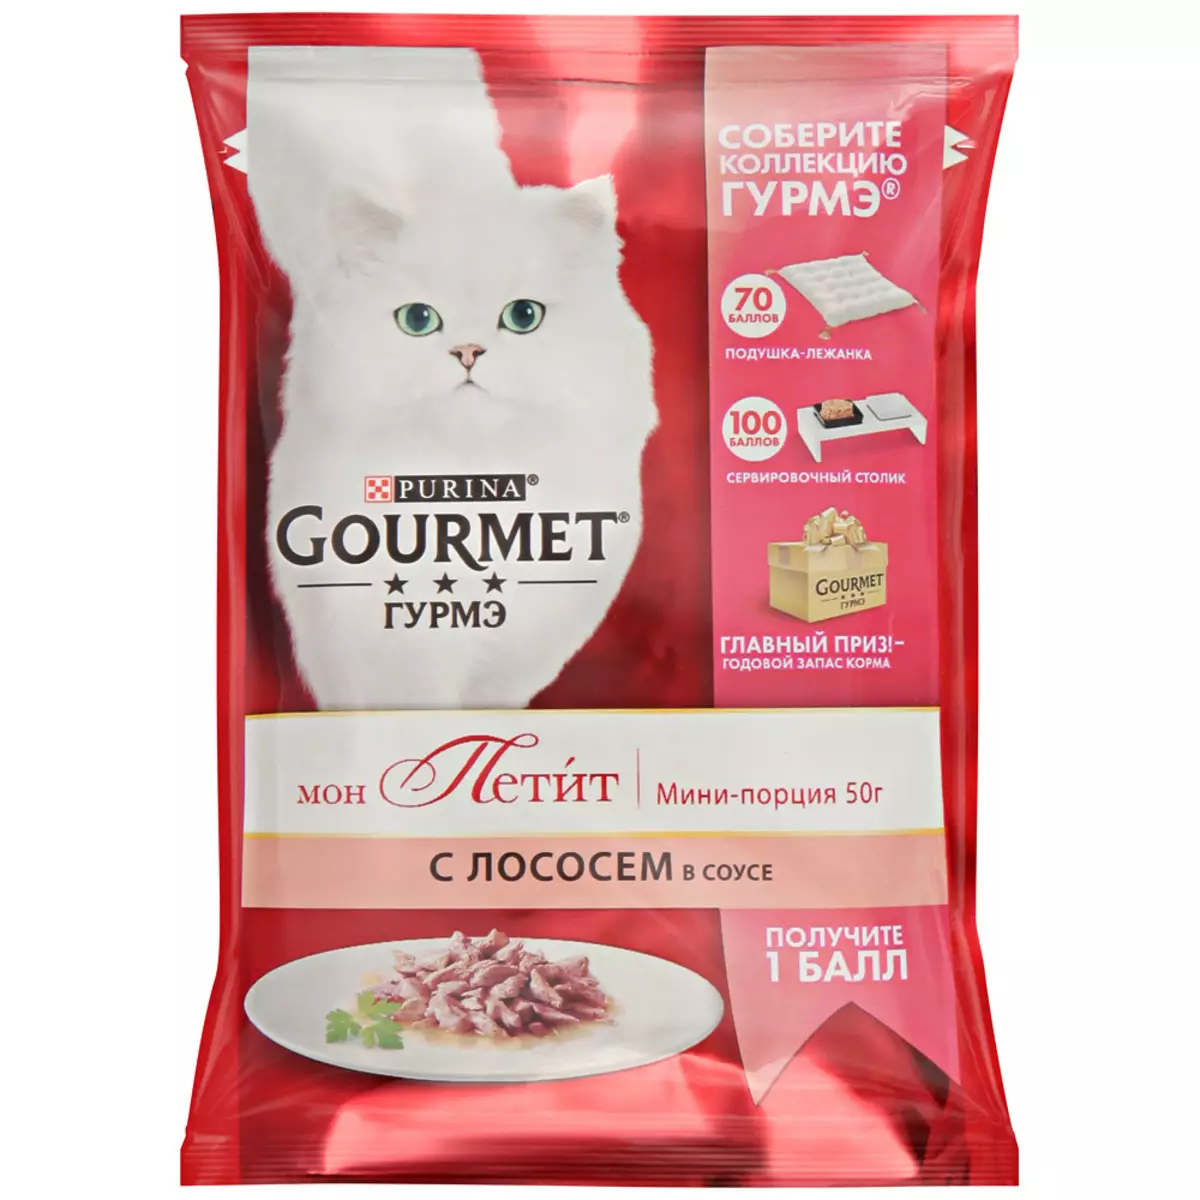 Gourmet: cat feed and purina kittens, wet pates and other feline canned food, their composition, reviews 22711_38